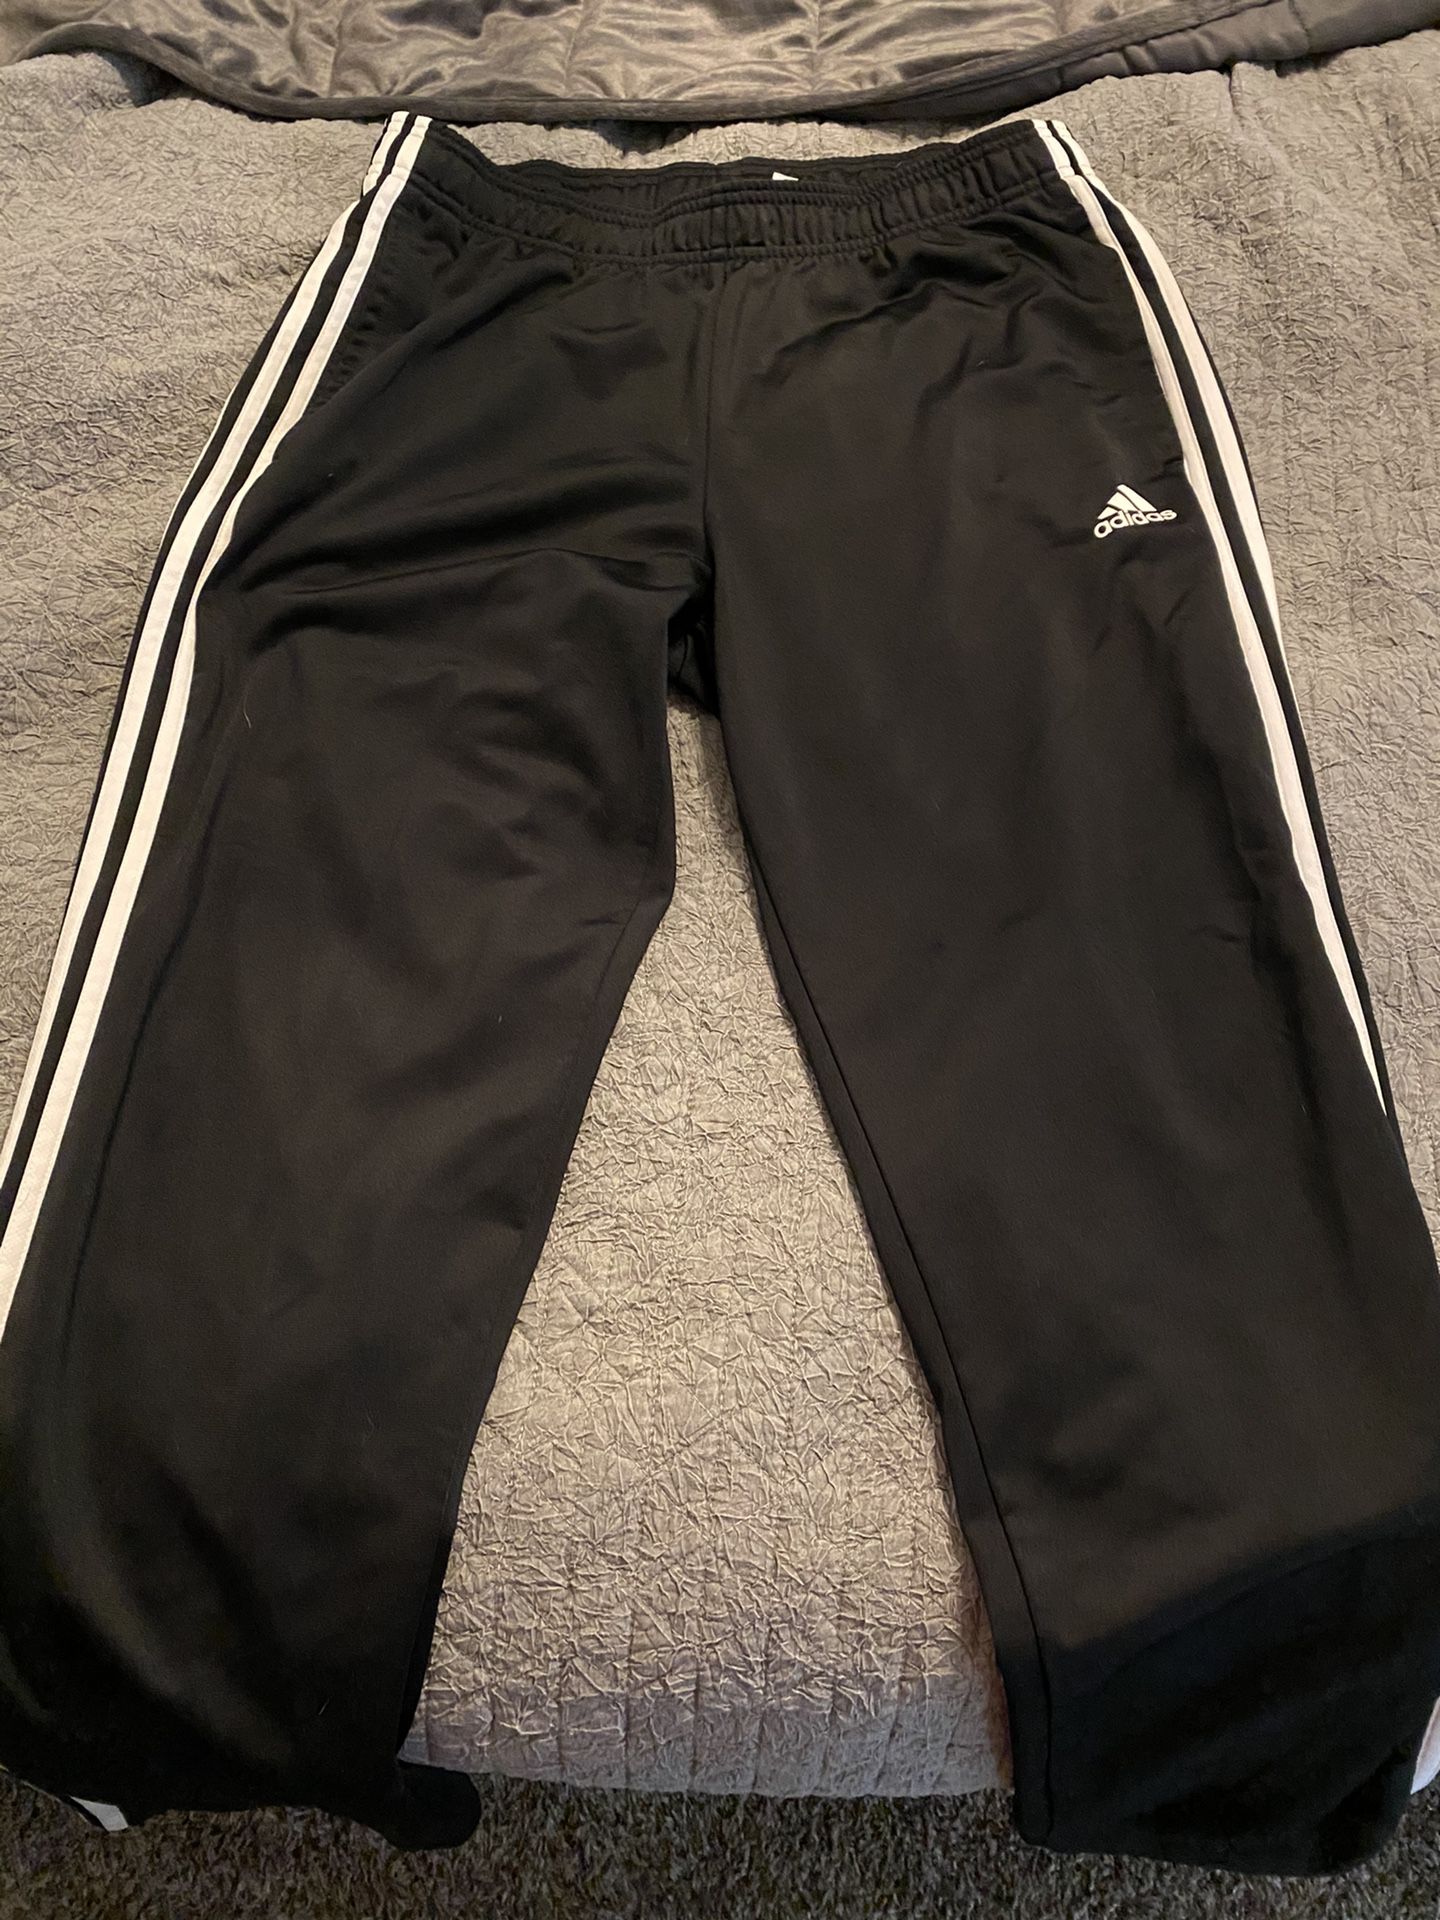 Adidas track pants size L. New condition!